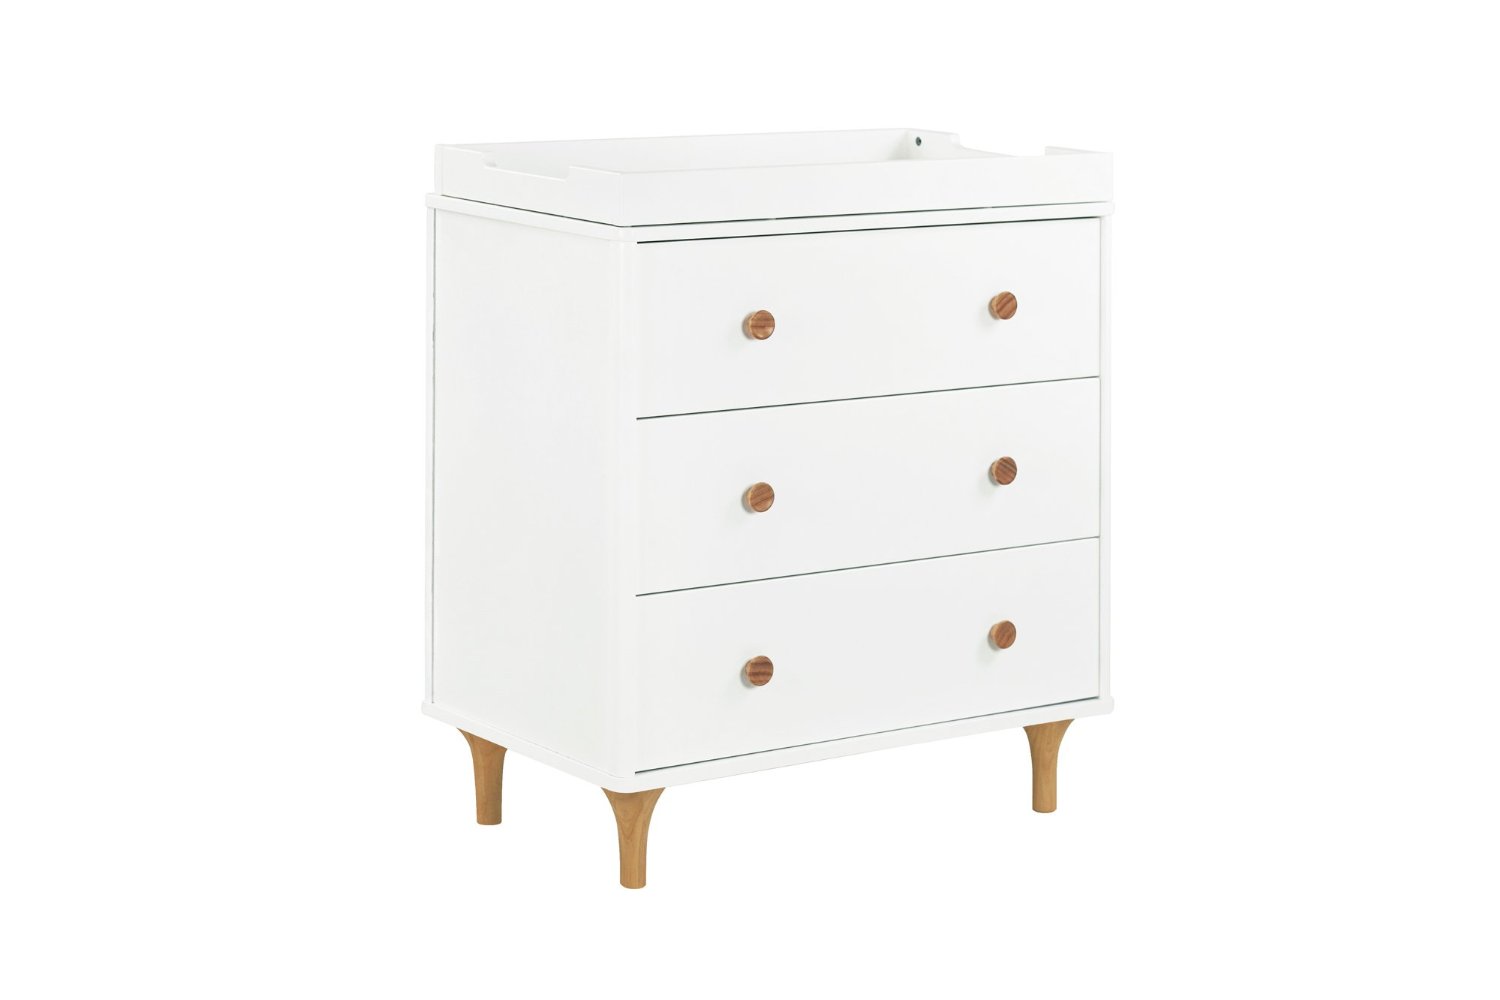 BabyLetto Lolly 3 Drawer Dresser Changer, White and Natural